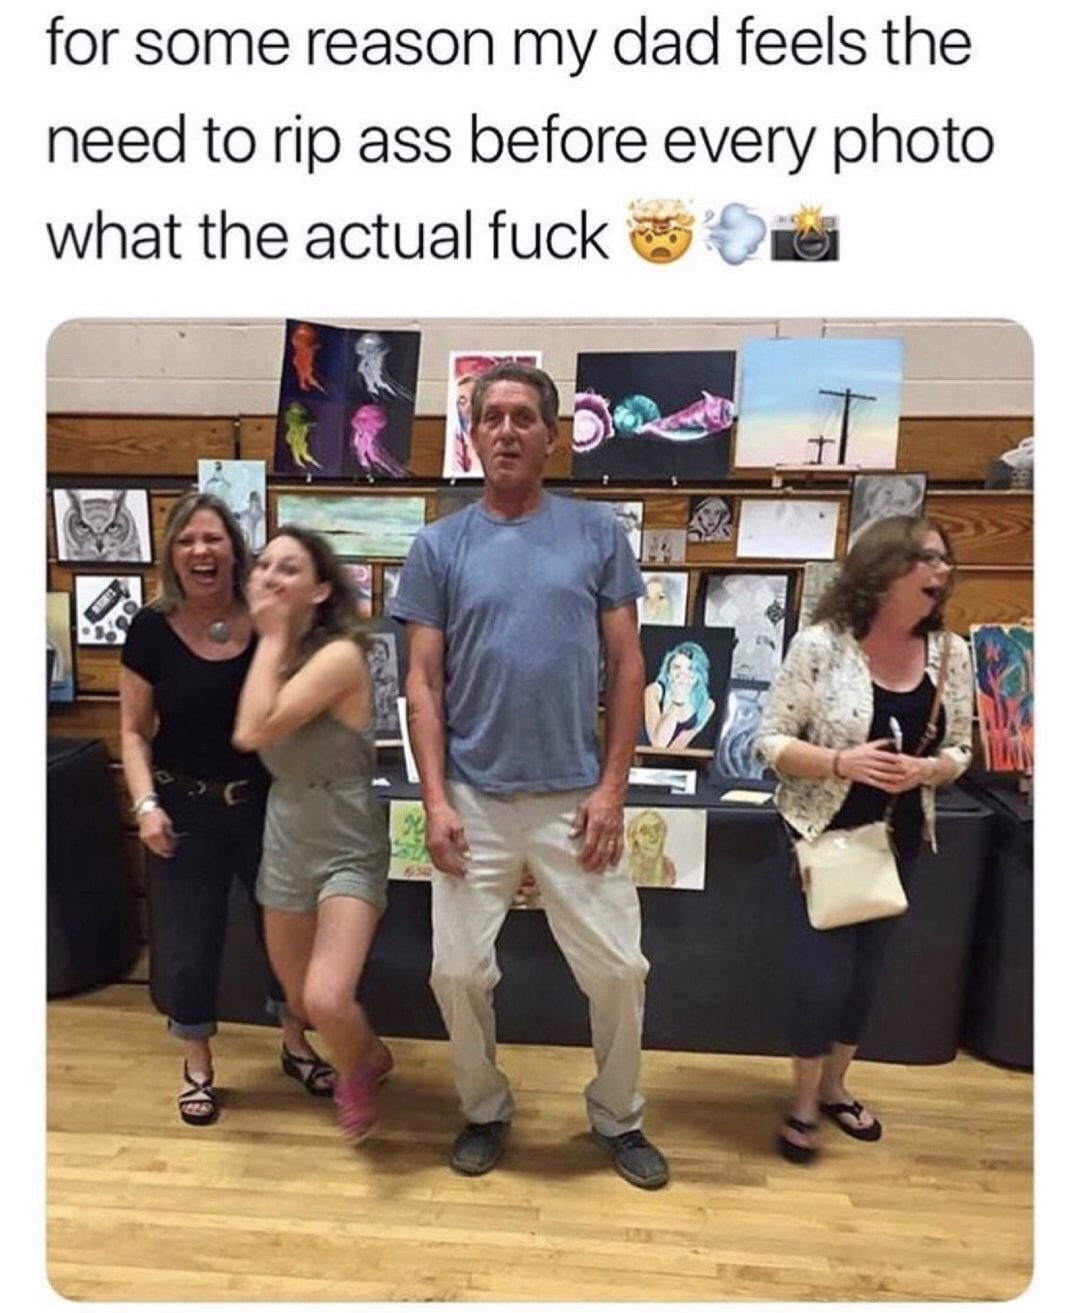 dad feels meme - for some reason my dad feels the need to rip ass before every photo what the actual fuck 3